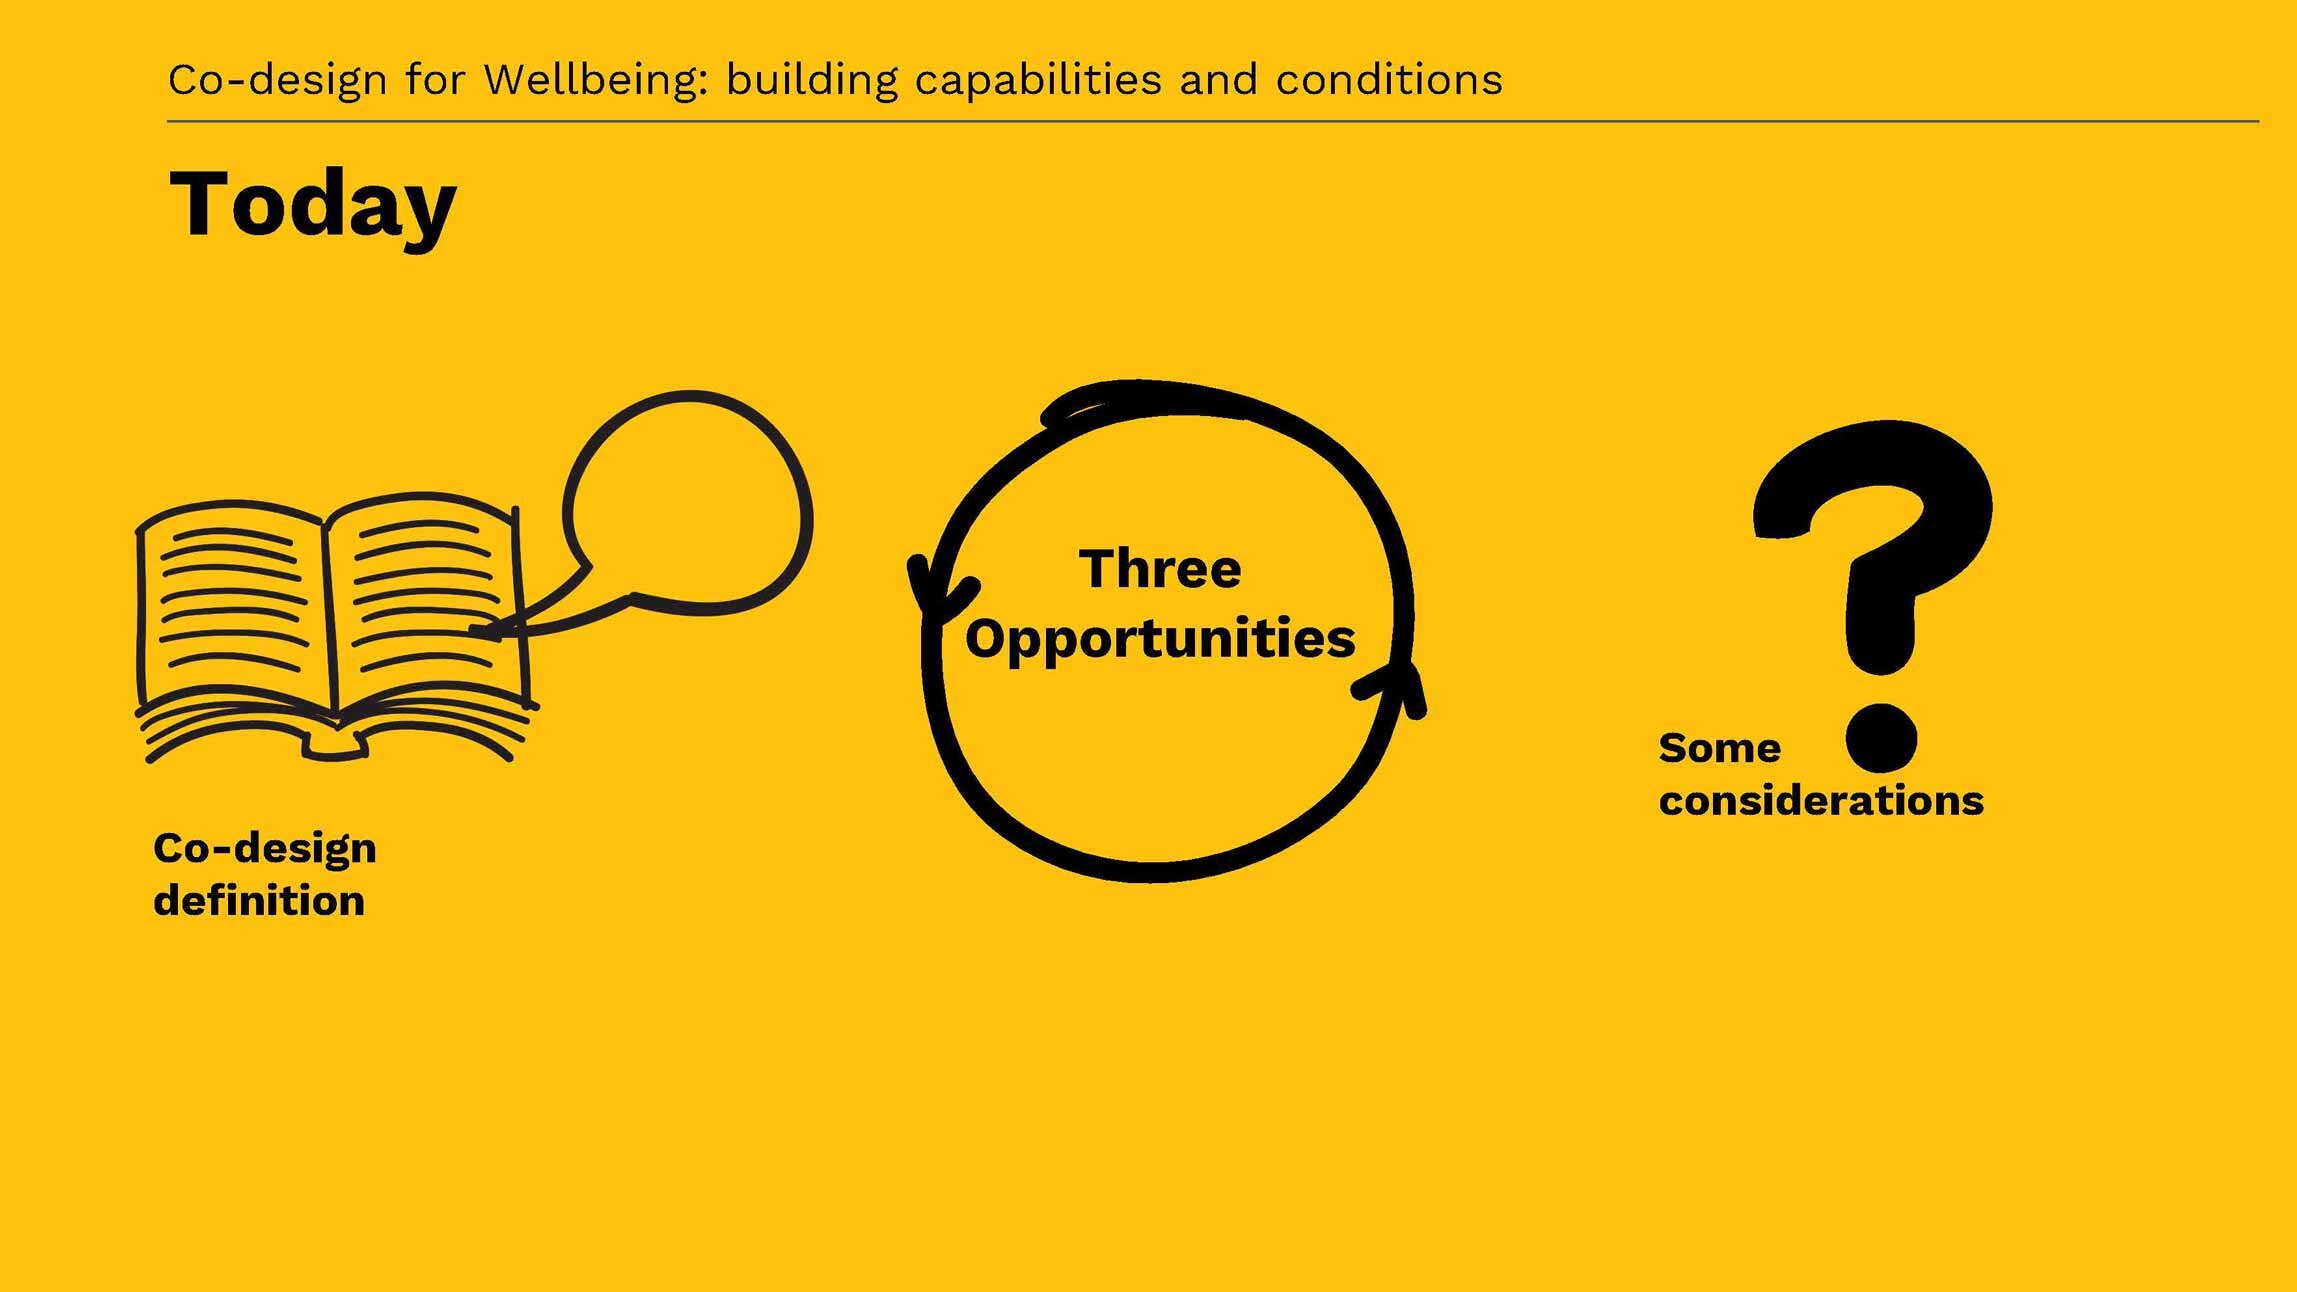 Co-design+for+well+being_+capabilities+and+conditions+(2)_Page_04.jpg